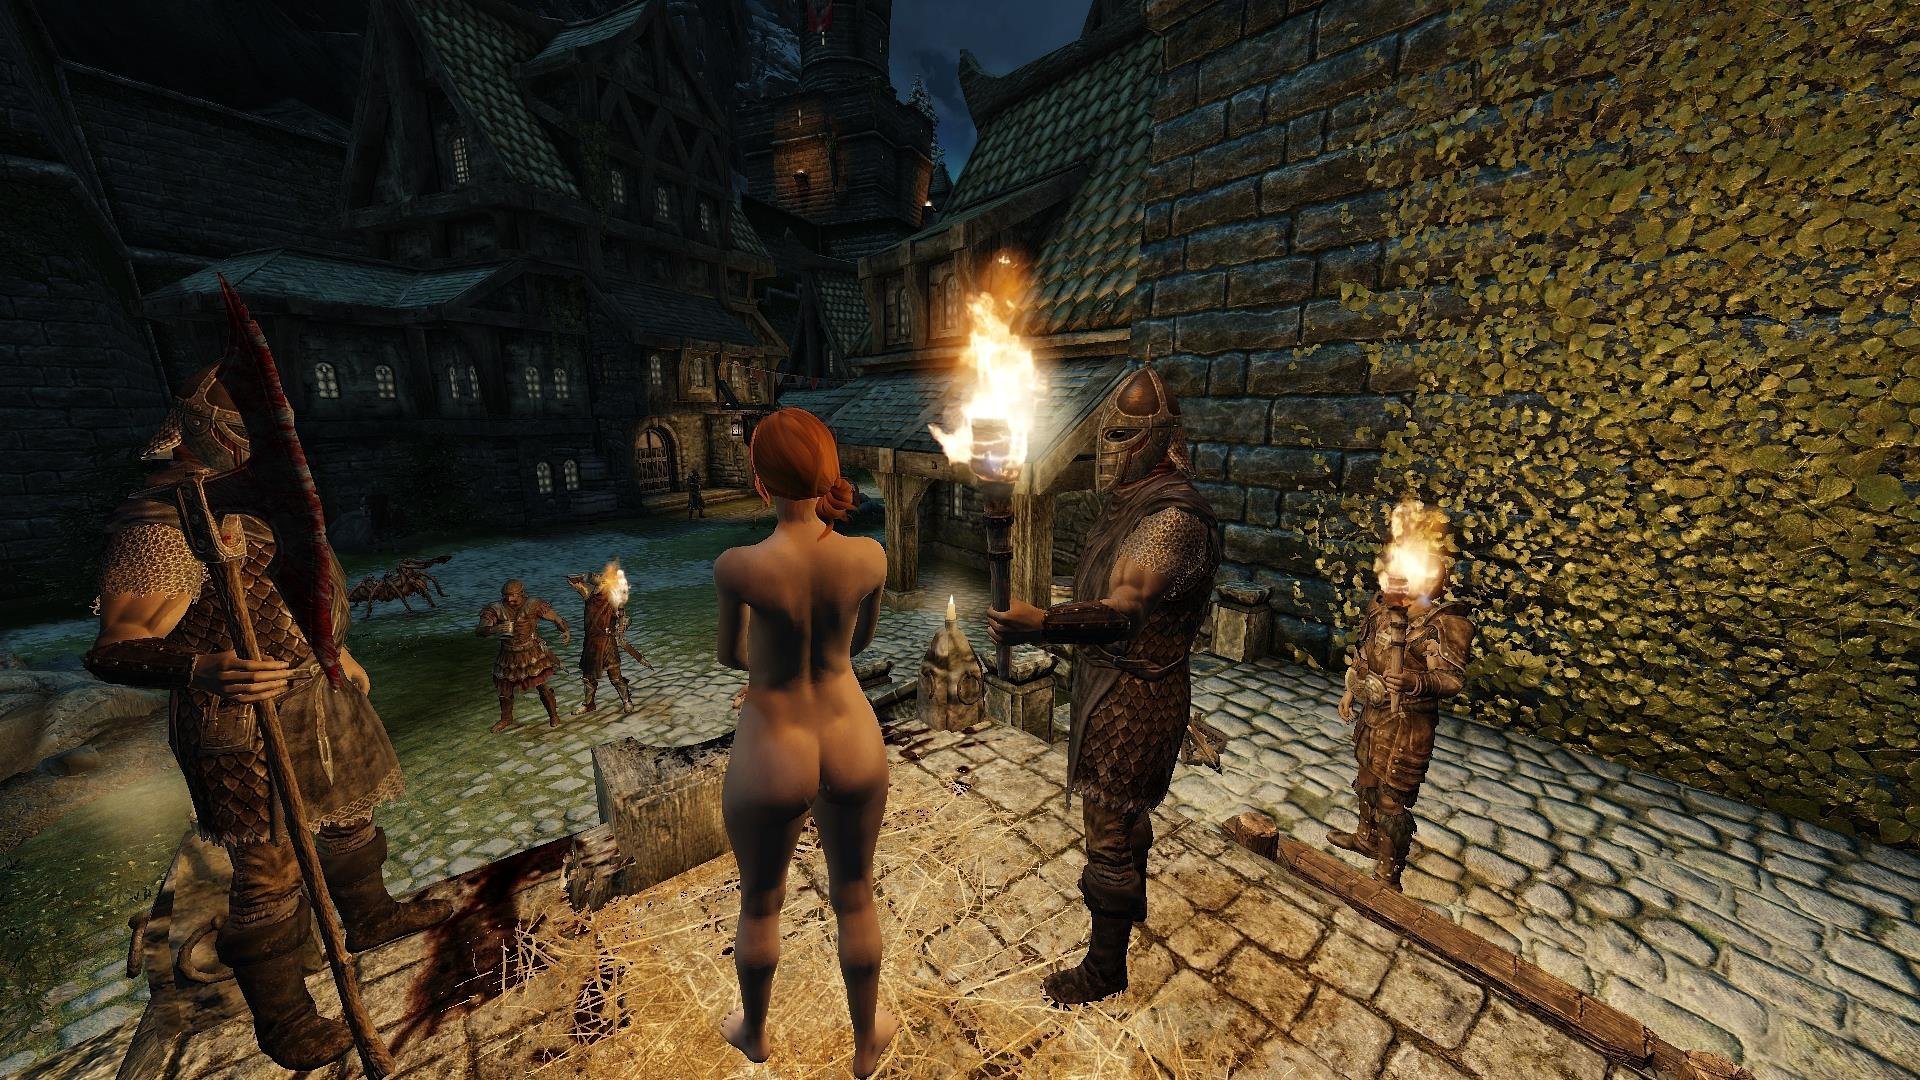 [idea] [request] Execution Turns Into An Orgy D Request And Find Skyrim Adult And Sex Mods